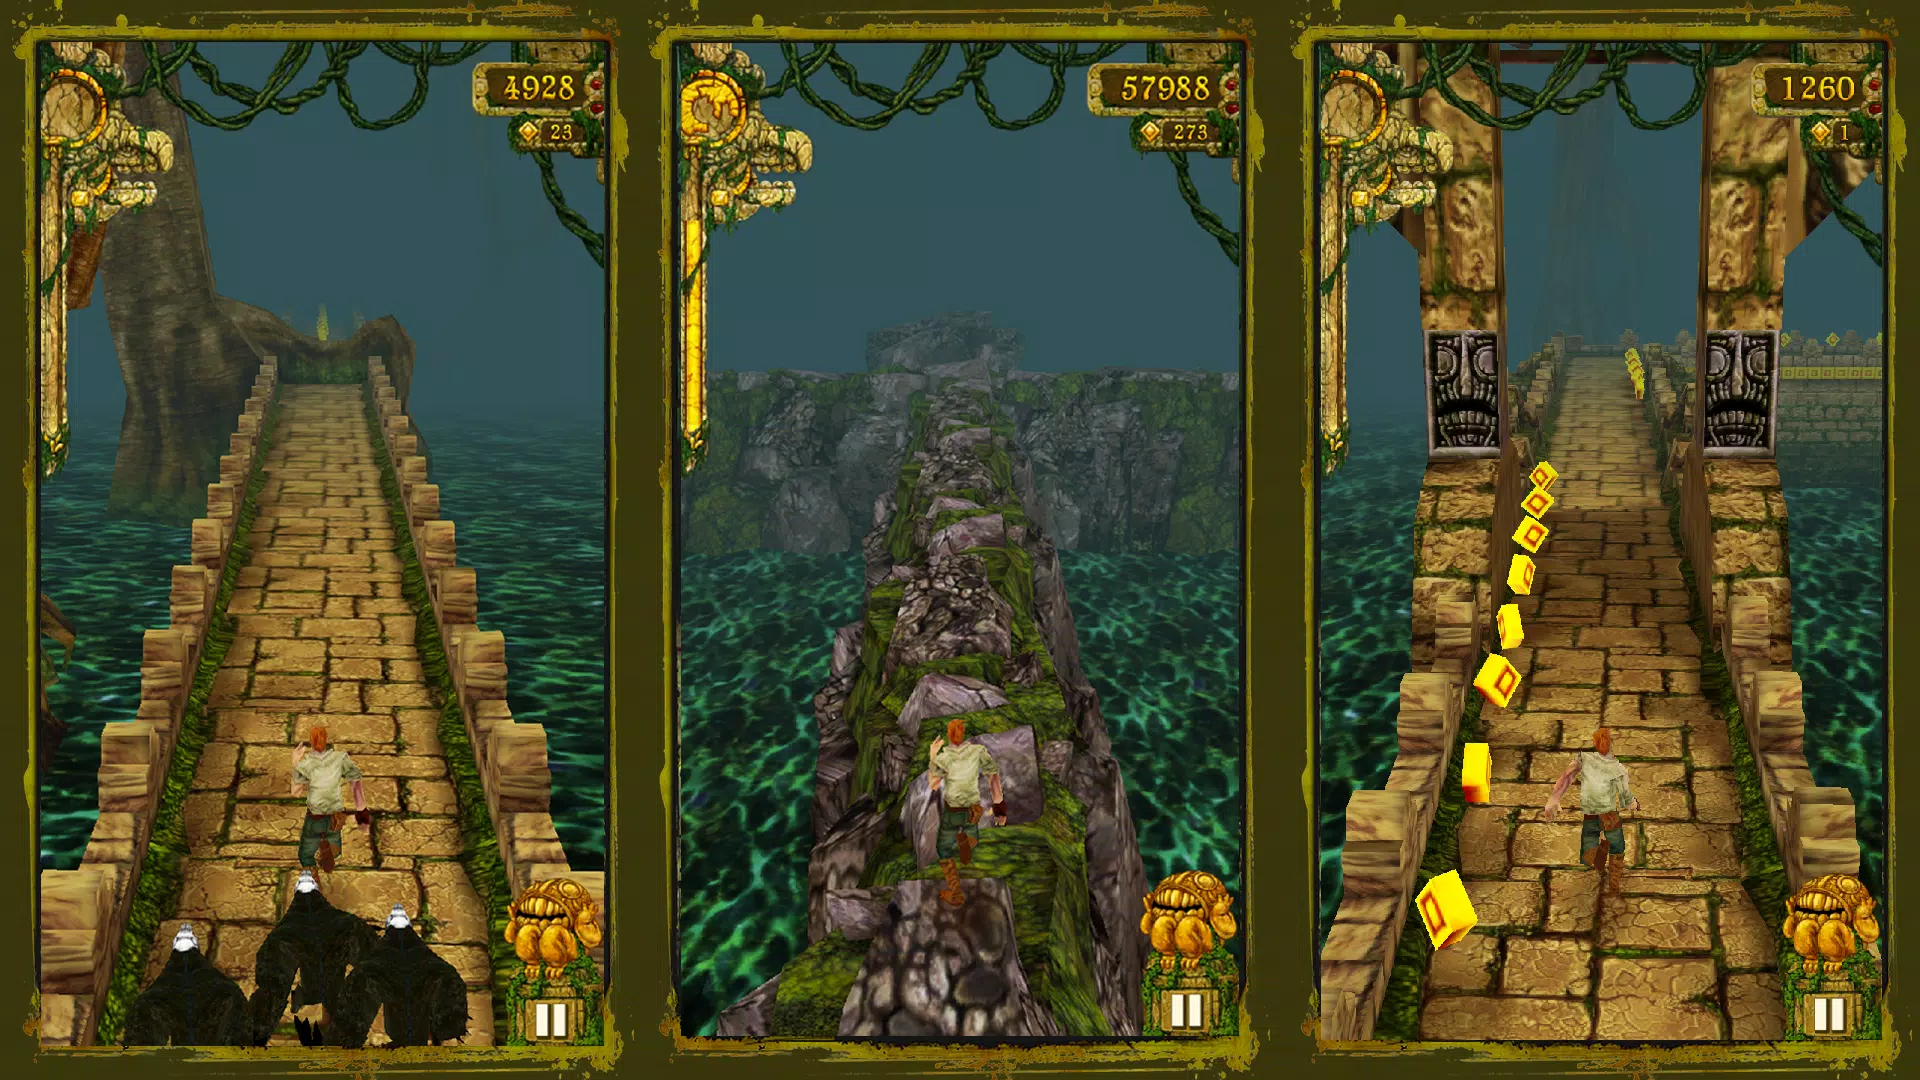 Temple Run Mod apk [Unlimited money] download - Temple Run MOD apk 1.25.0  free for Android.